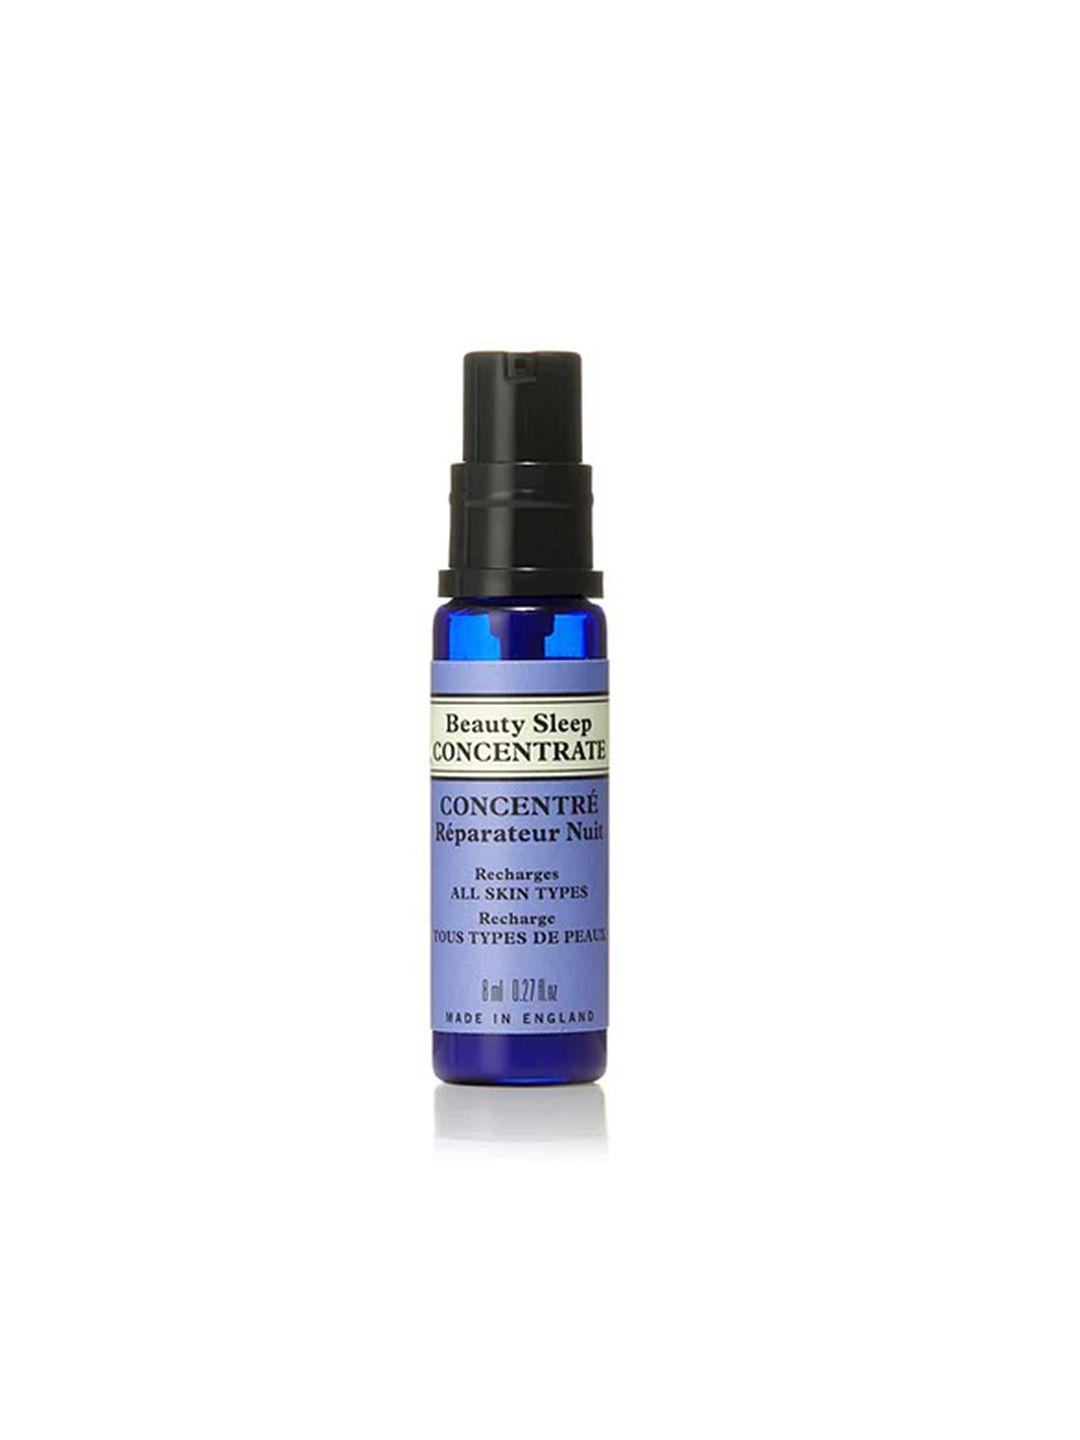 neal's yard remedies beauty sleep concentrate face serum with hyaluronic acid - 8 ml